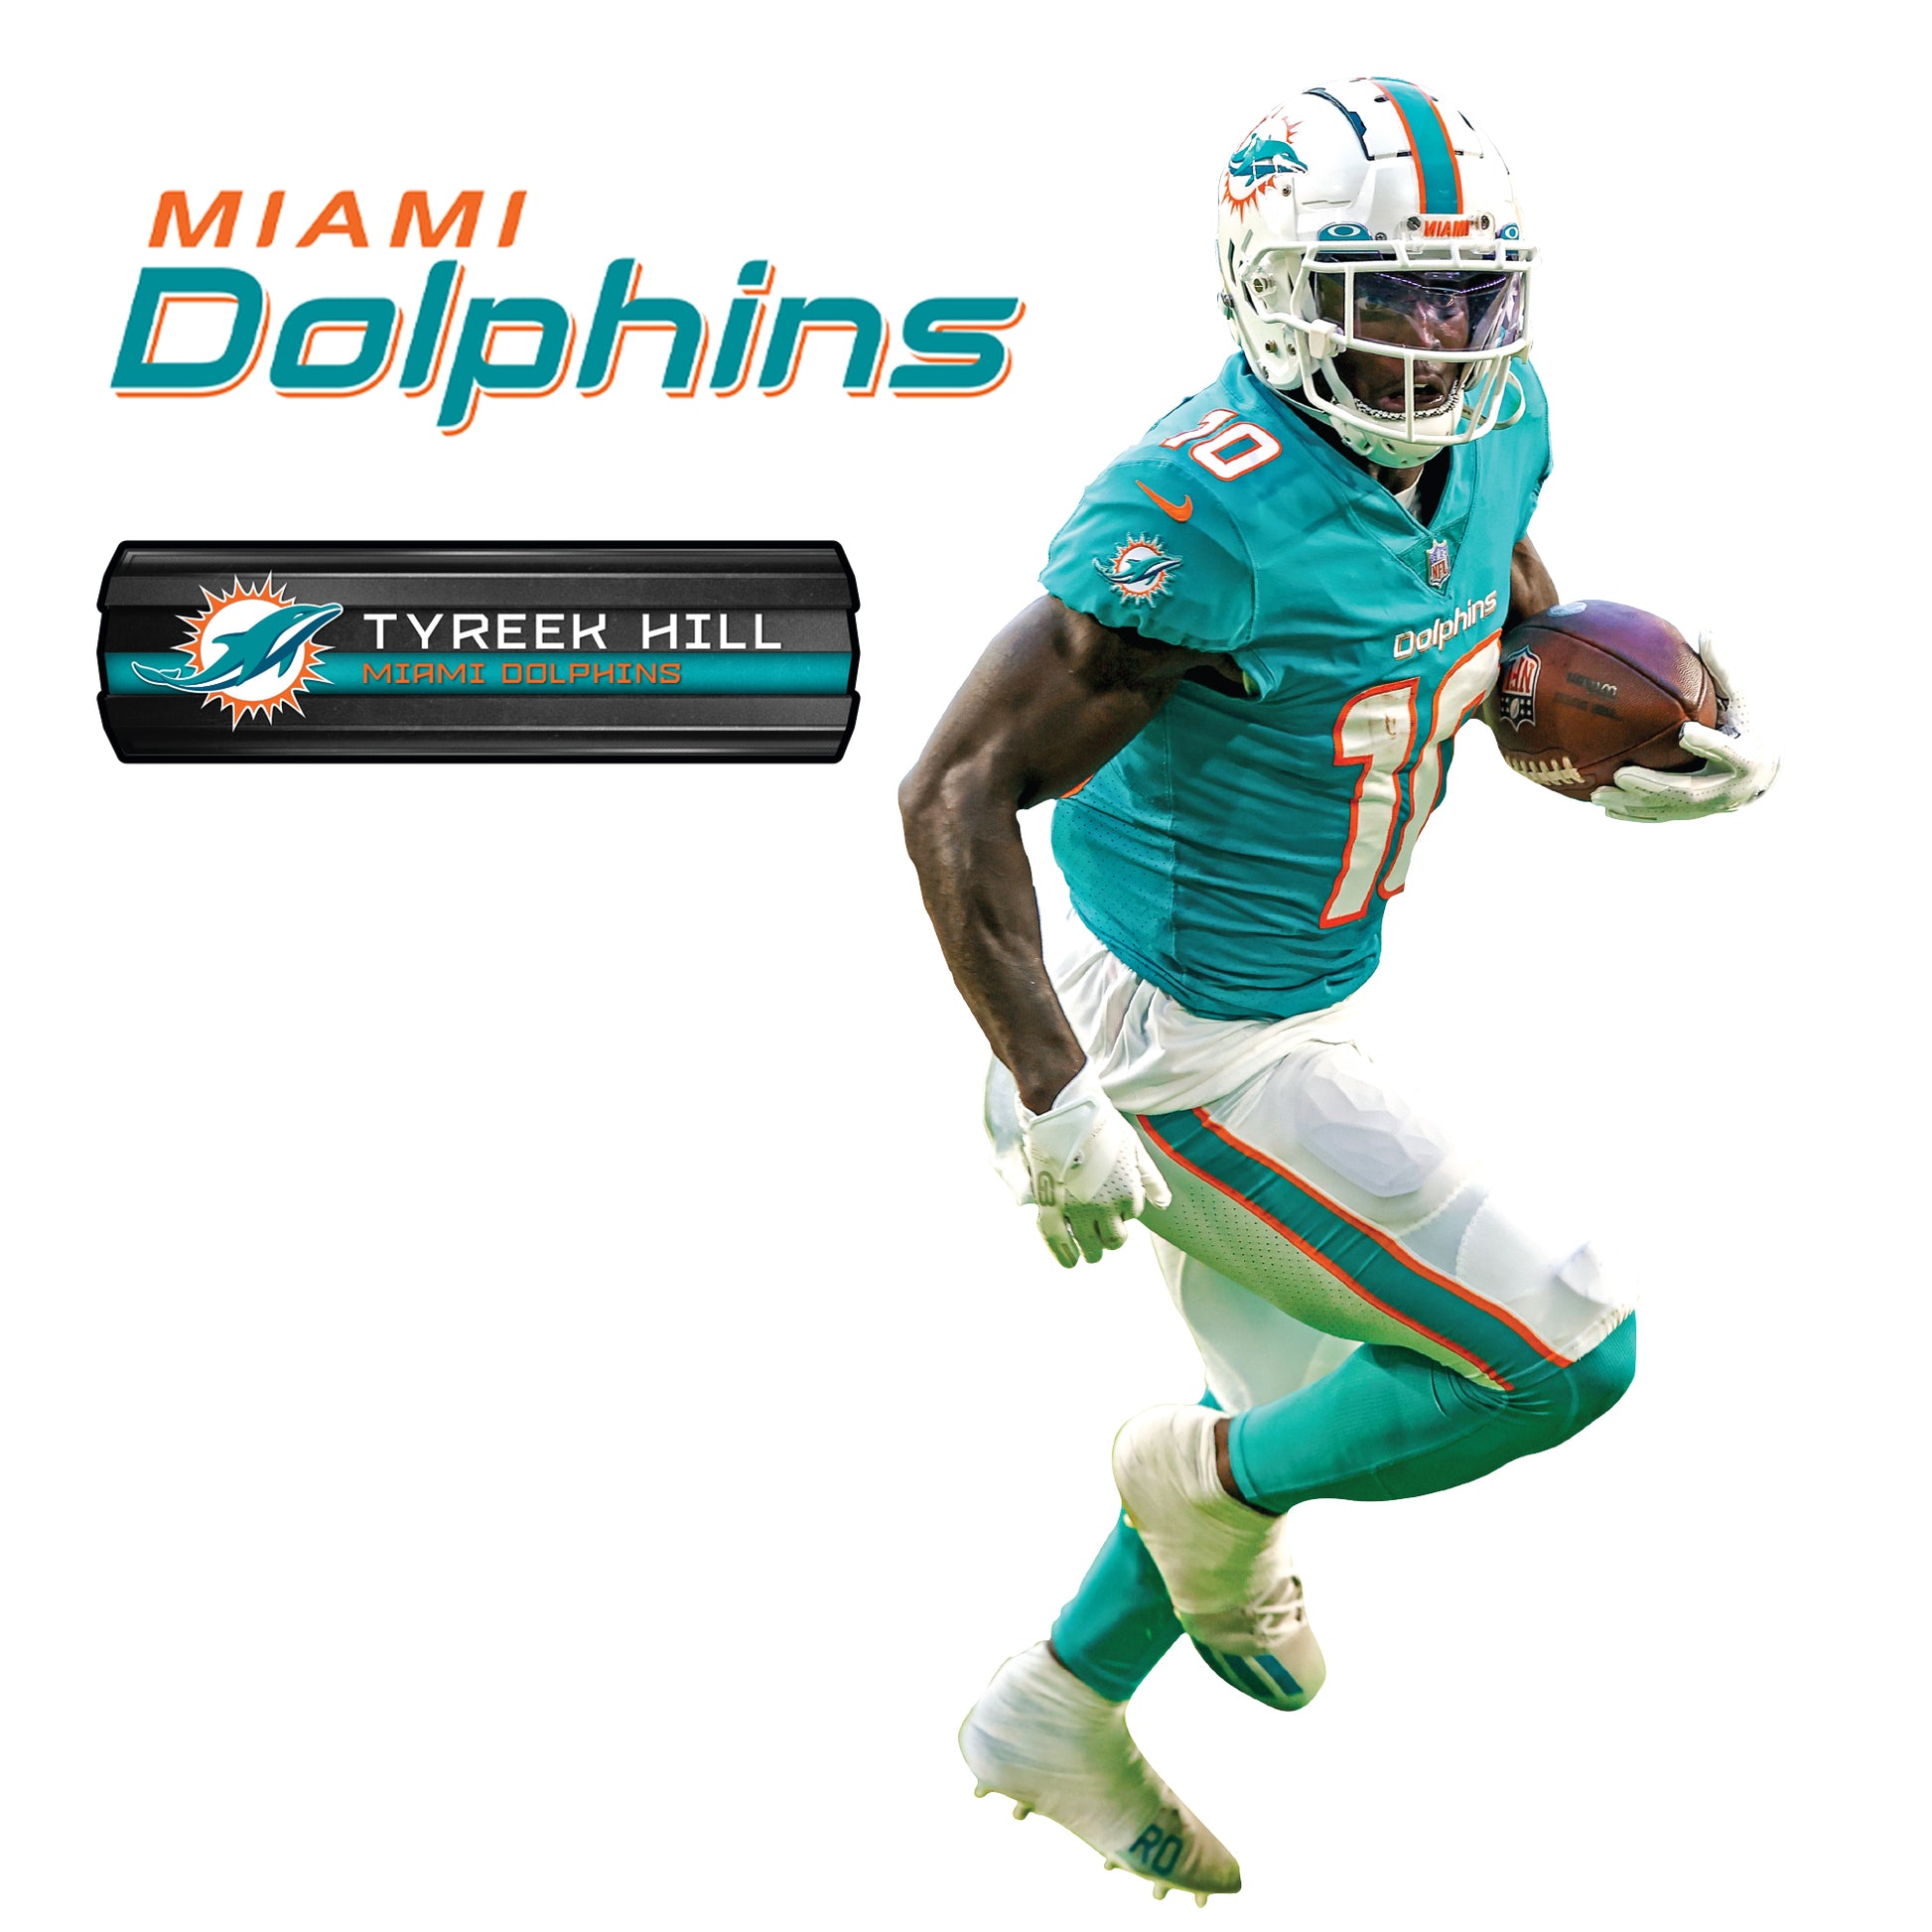 Miami Dolphins: Tyreek Hill 2022 - Officially Licensed NFL